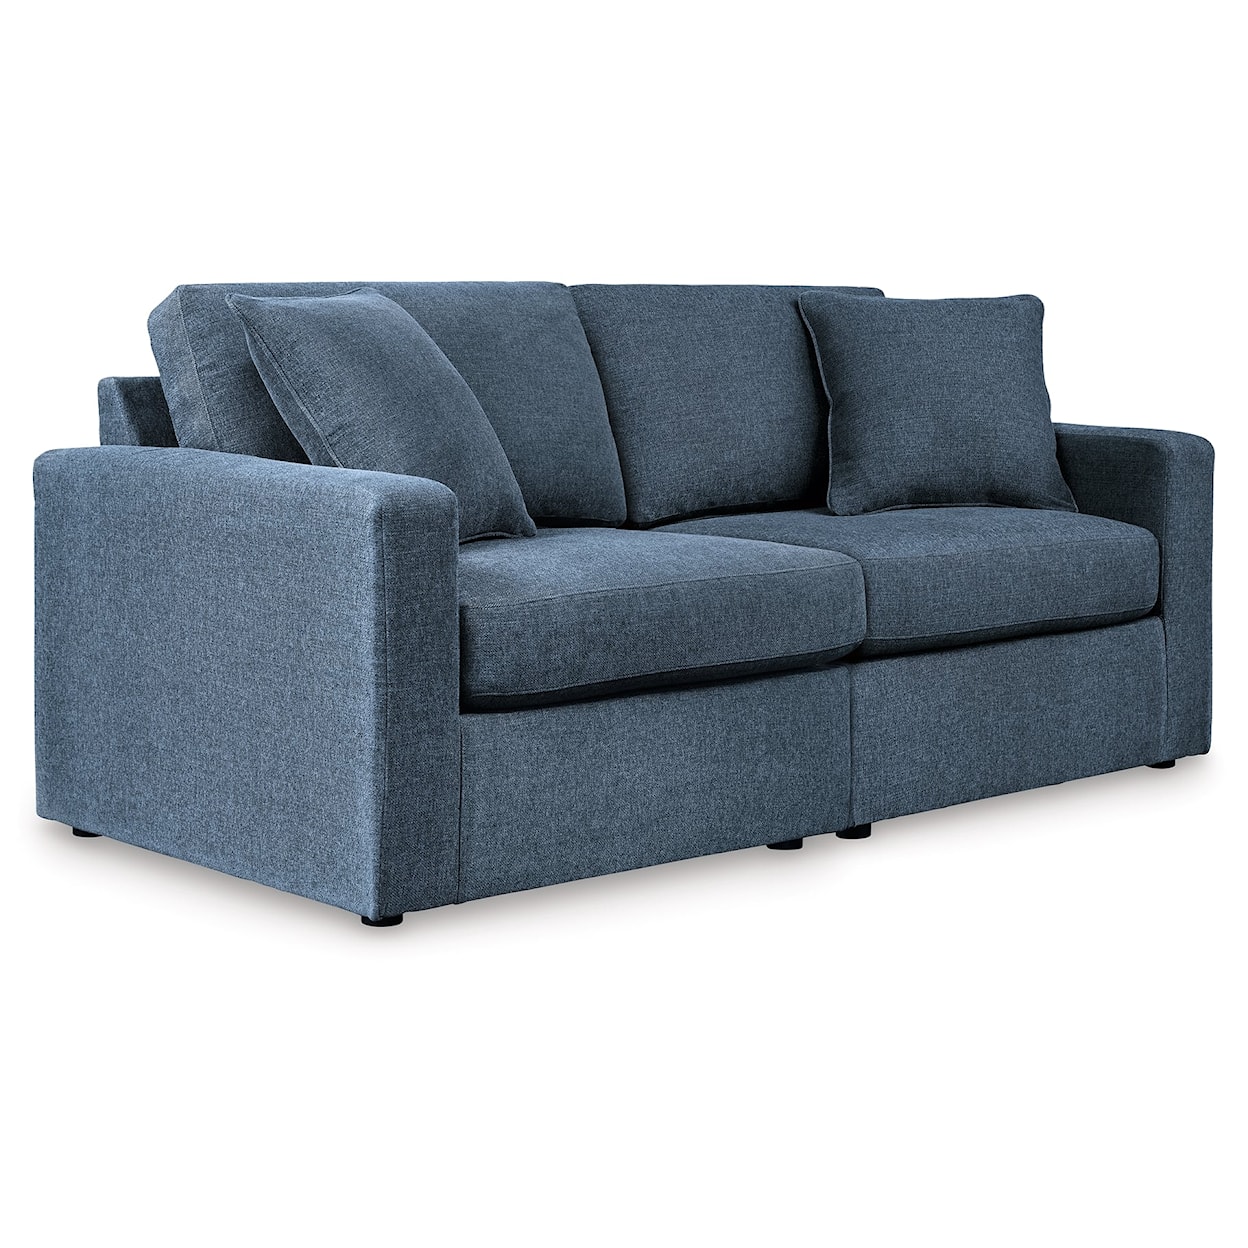 Signature Design by Ashley Modmax 2-Piece Sectional Loveseat